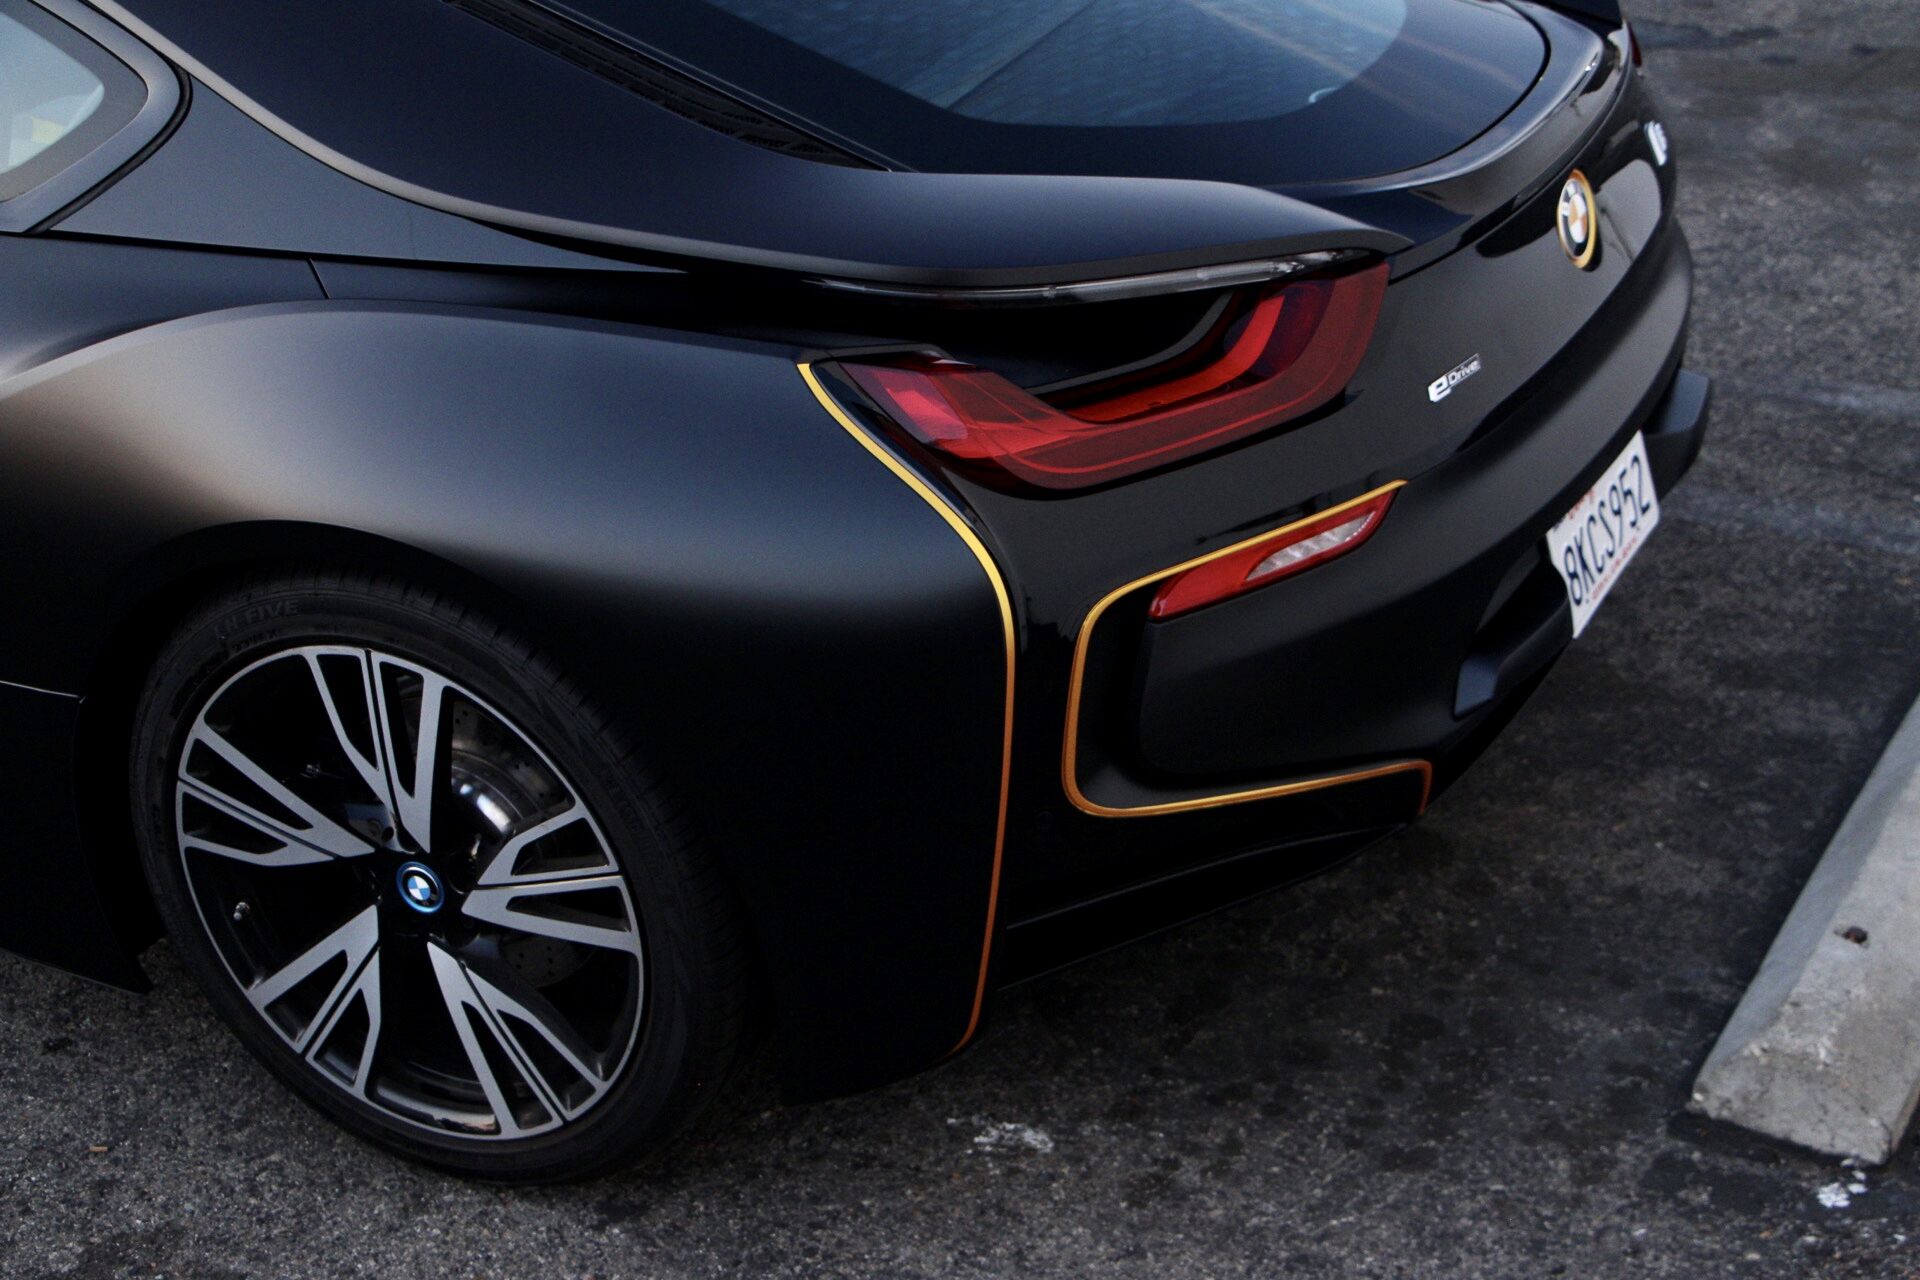 The Sexy and Innovative BMW i8 Leaves Envy Wherever It Drives